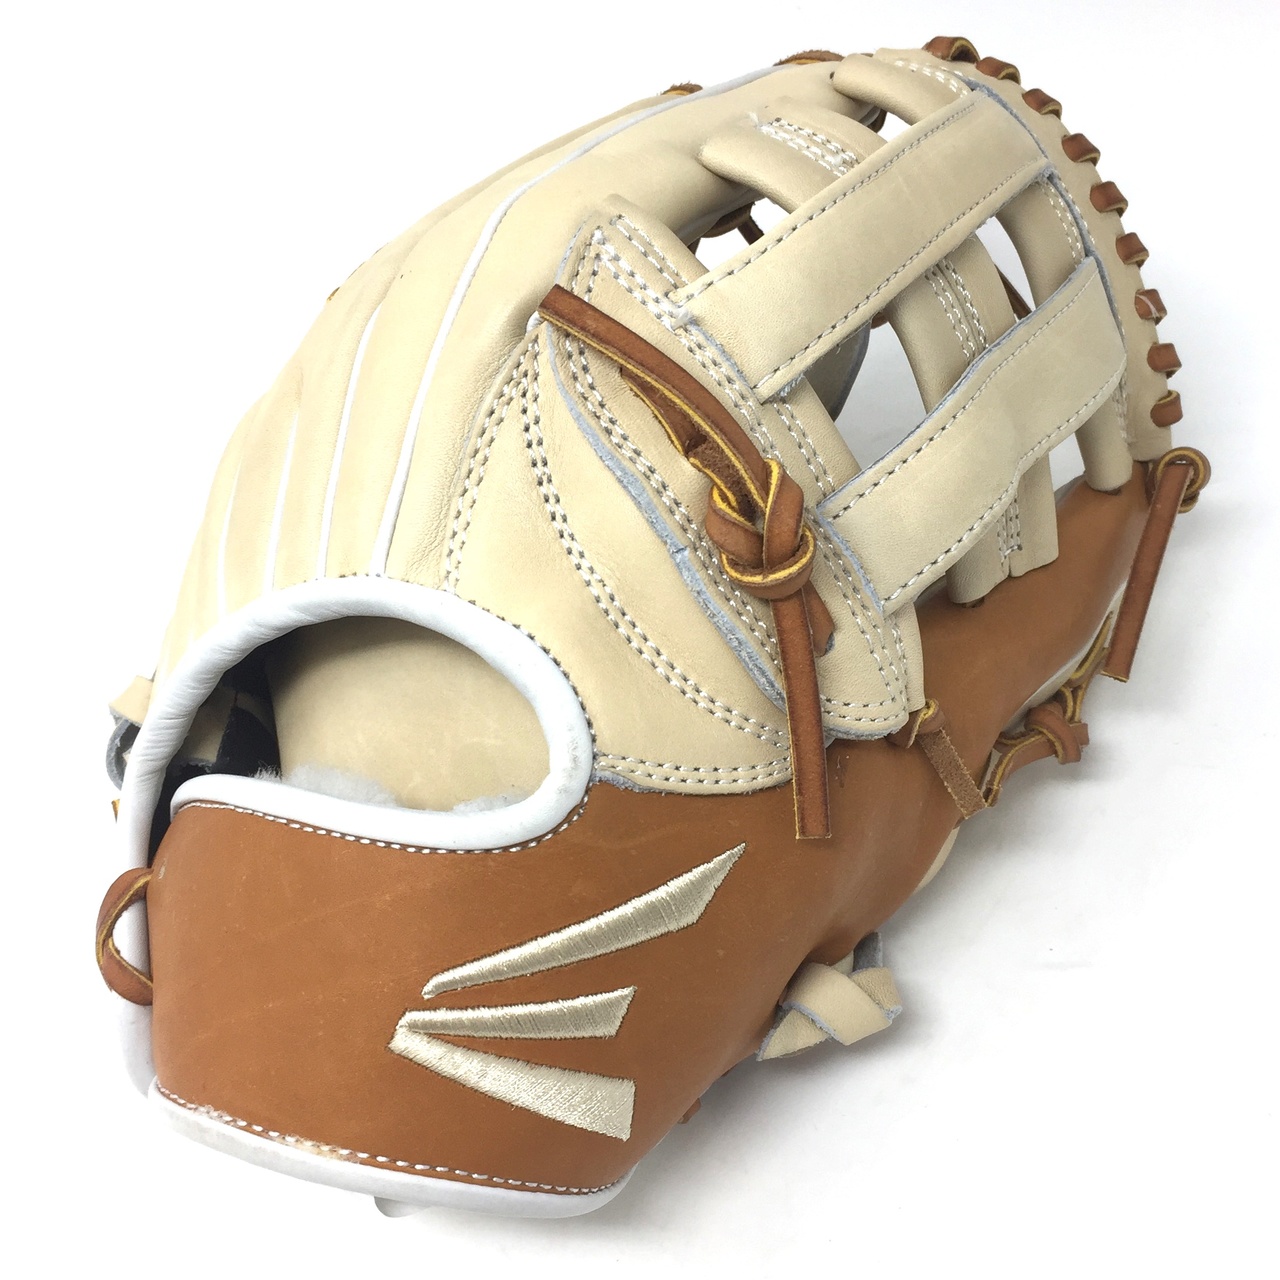 easton-small-batch-35-baseball-glove-11-75-right-hand-throw SMB35-C33-RightHandThrow Easton 628412242292 <p><span>Eastons Small Batch project focuses on ball glove development using only